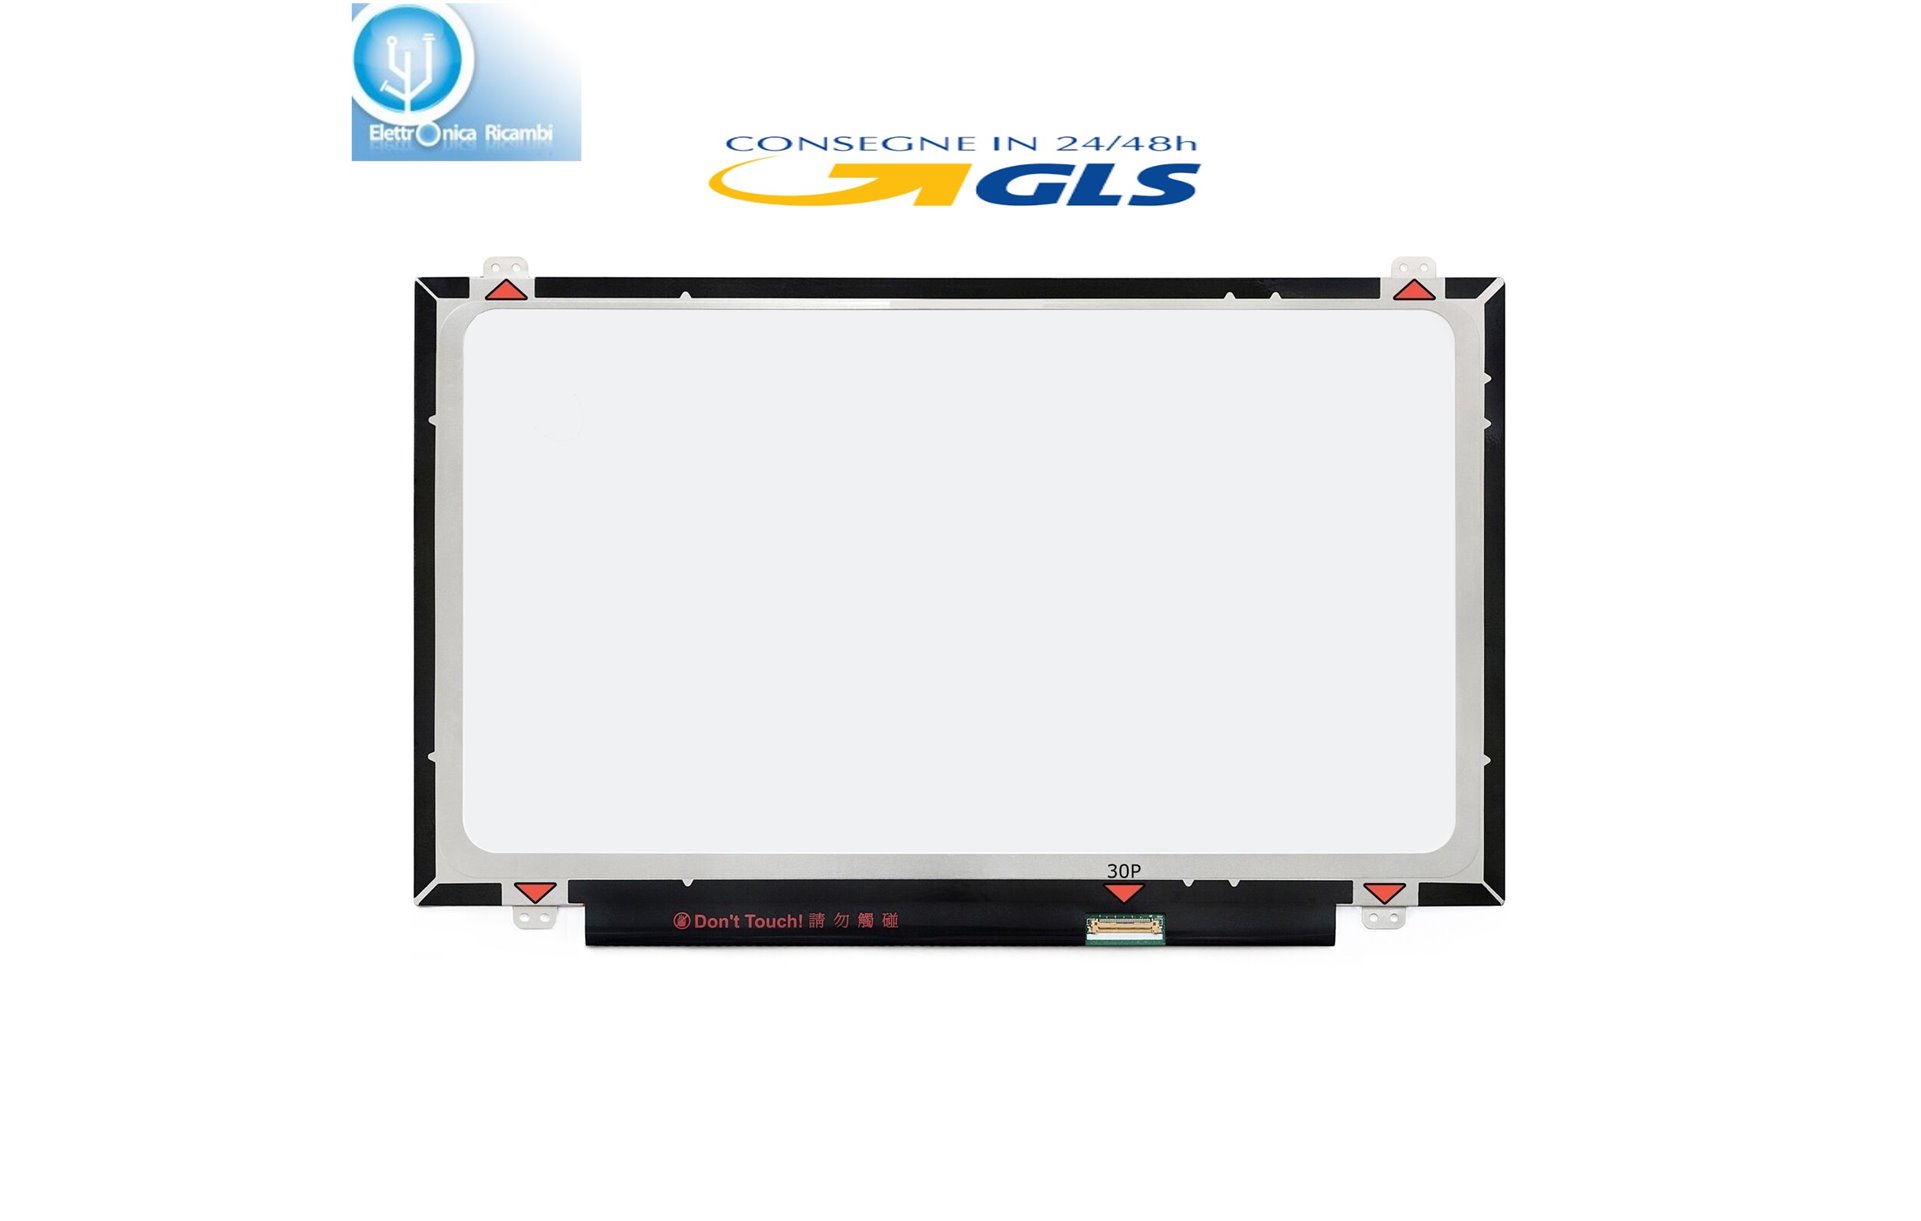 Display LCD Schermo Dell WYSE 7452 SERIES 14.0 LED SLIM 30 pin HD (1366x768)